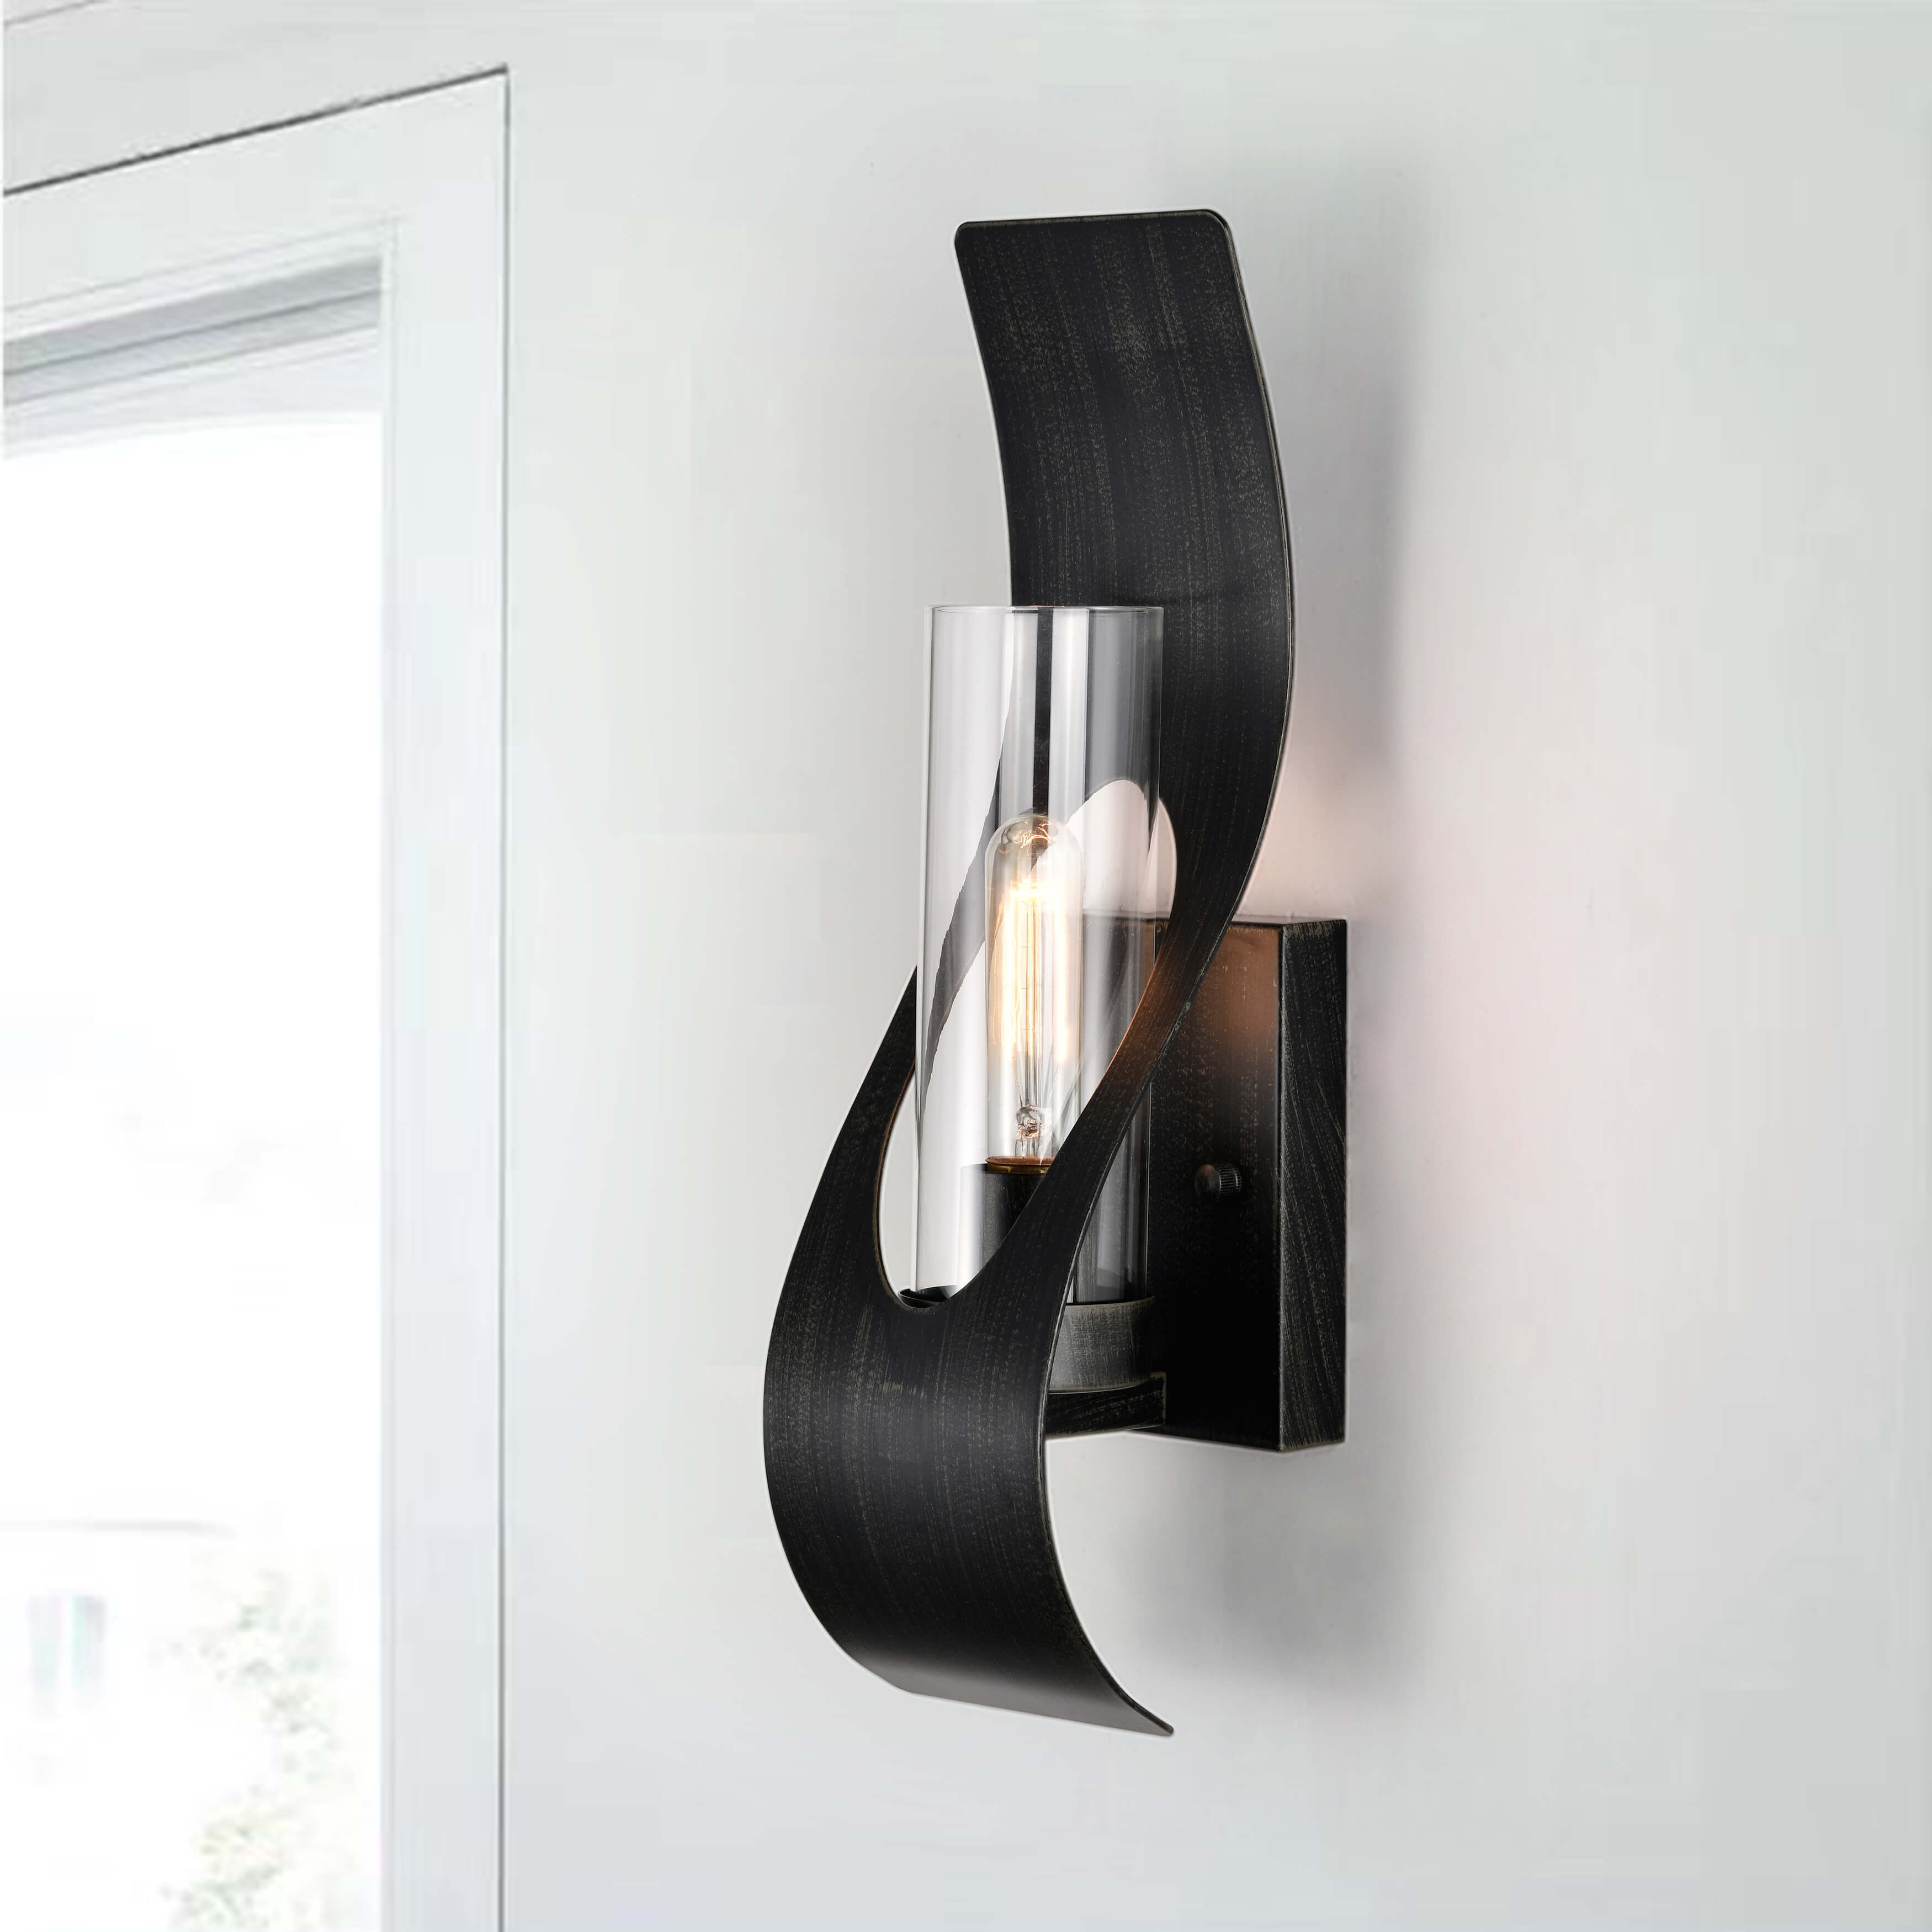 Anastasia Antique Black 1 light Curved Frame Clear Glass Wall Sconce FD-9302-DBD